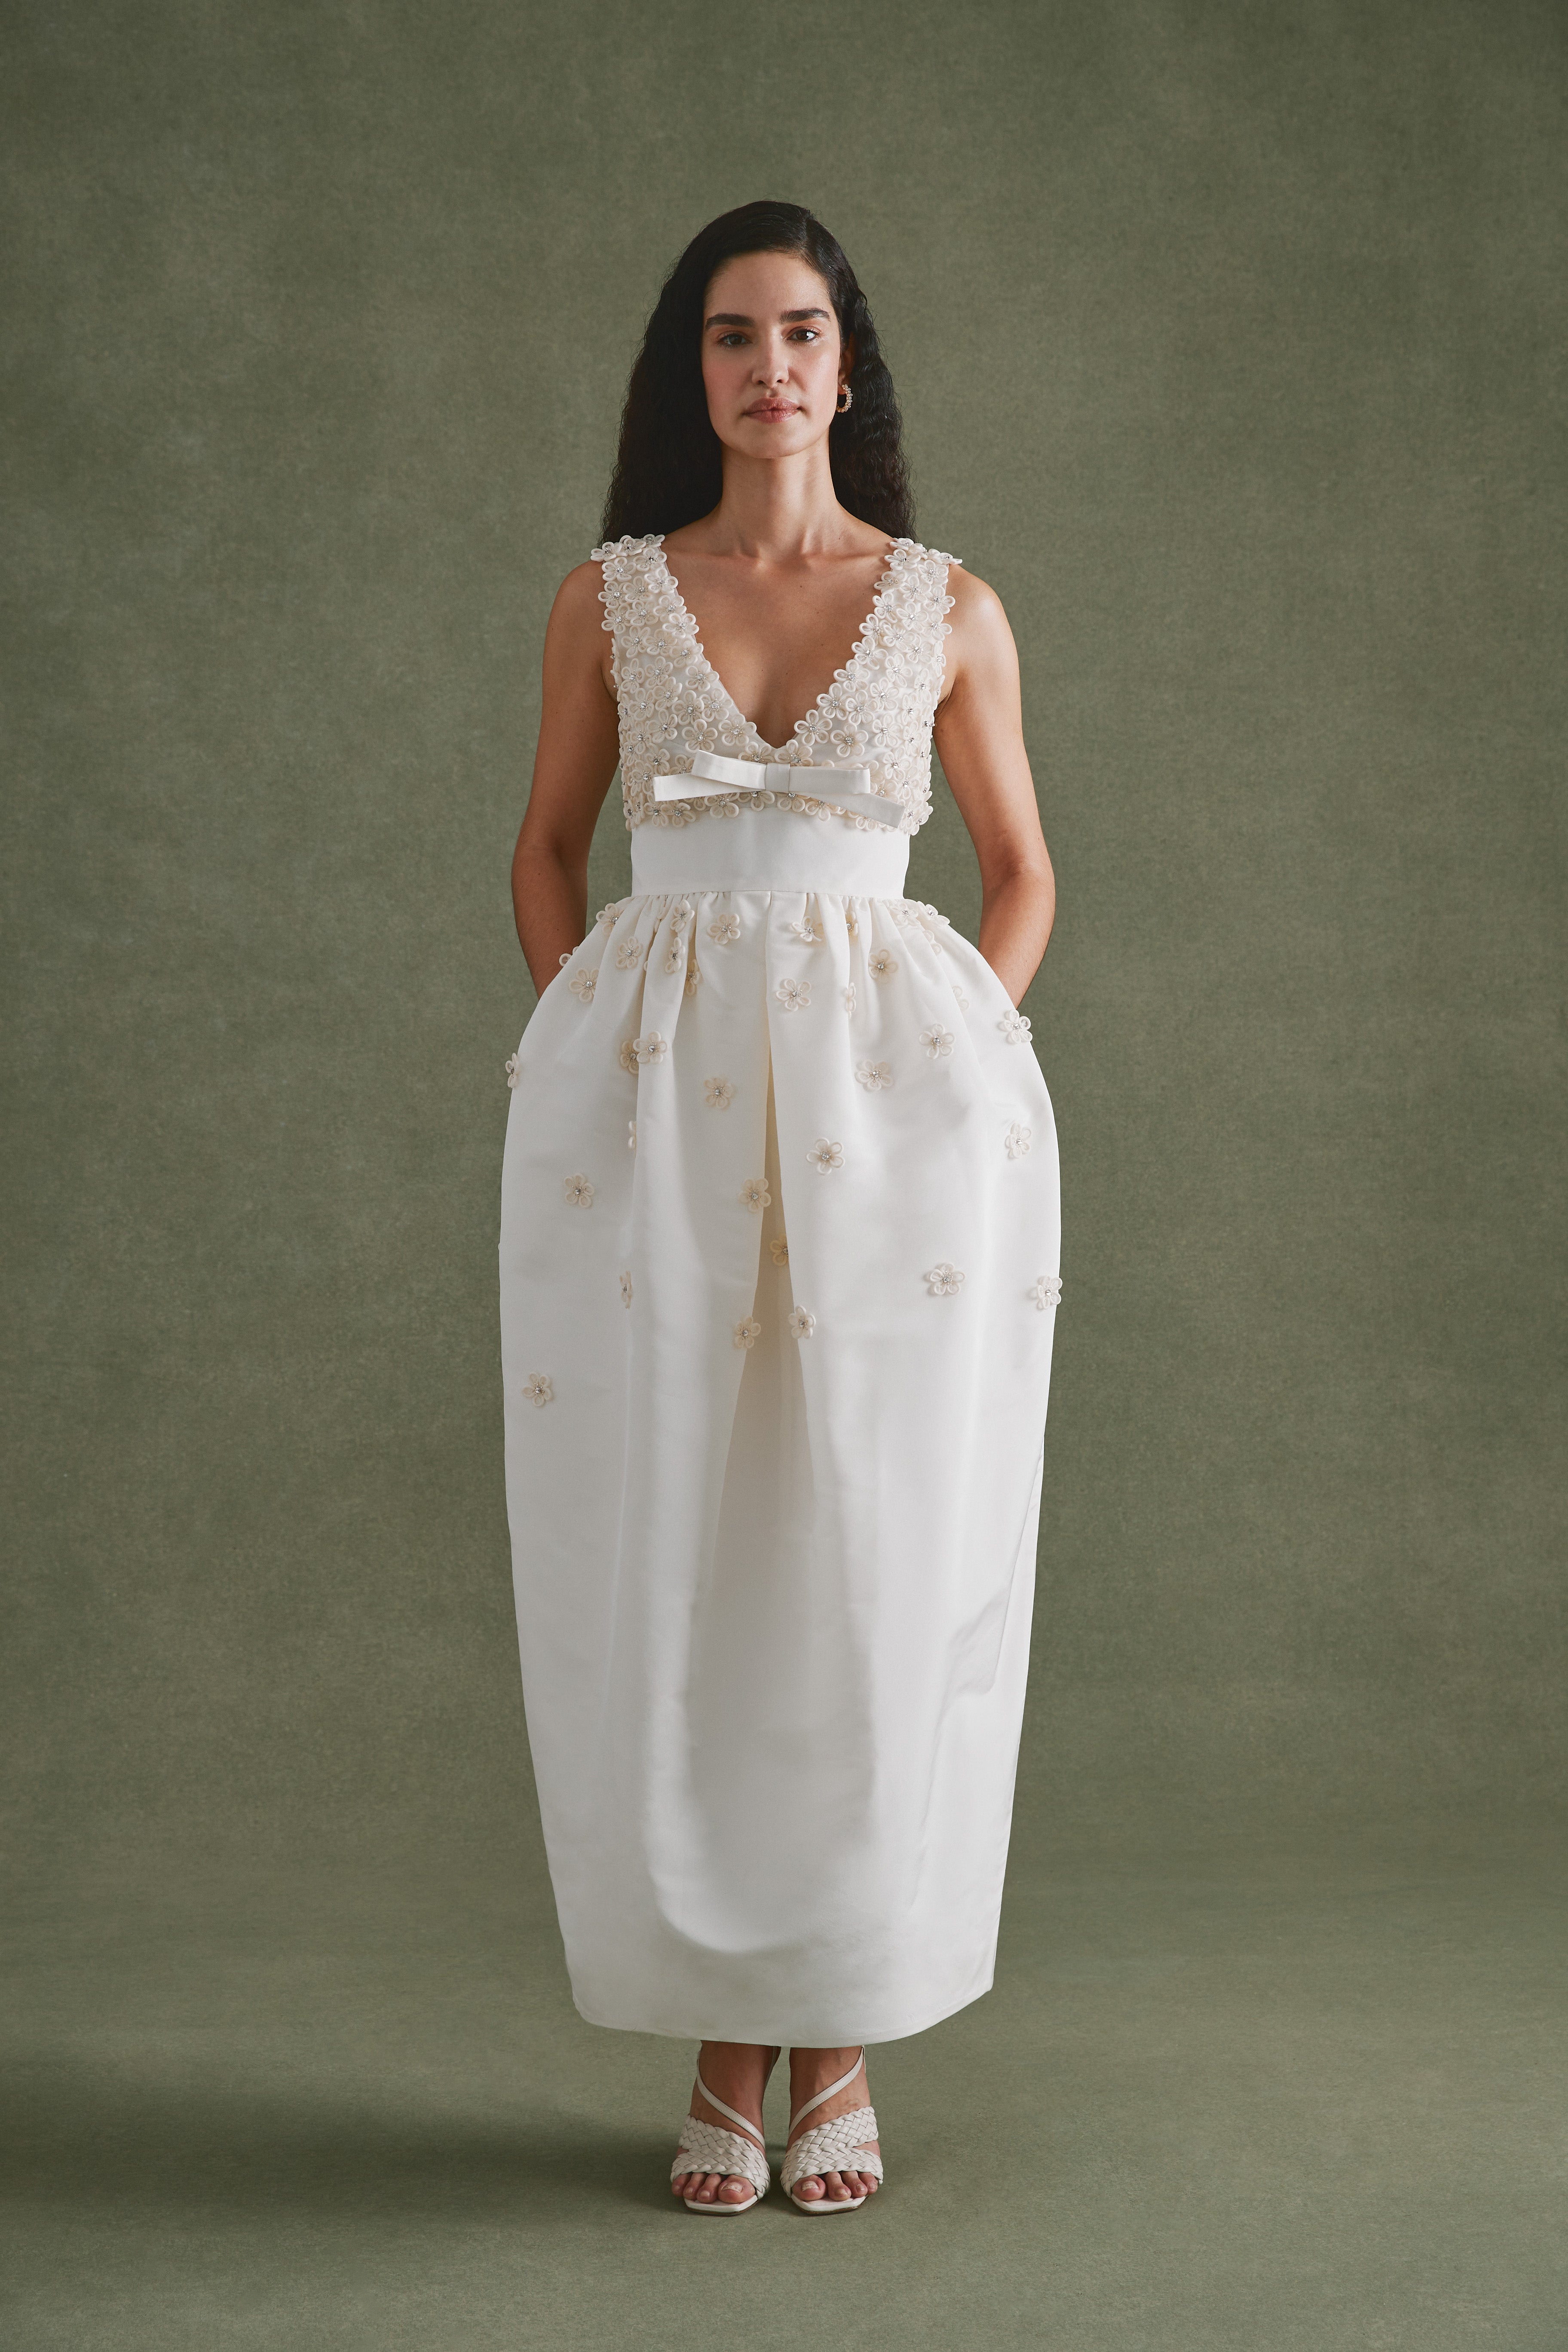 Alexandra Pijut Rainey Dress in ivory silk faille with bow and flower beading. Wedding dress, bridal, bride, rehearsal dinner, after party outfit. Ankle length.